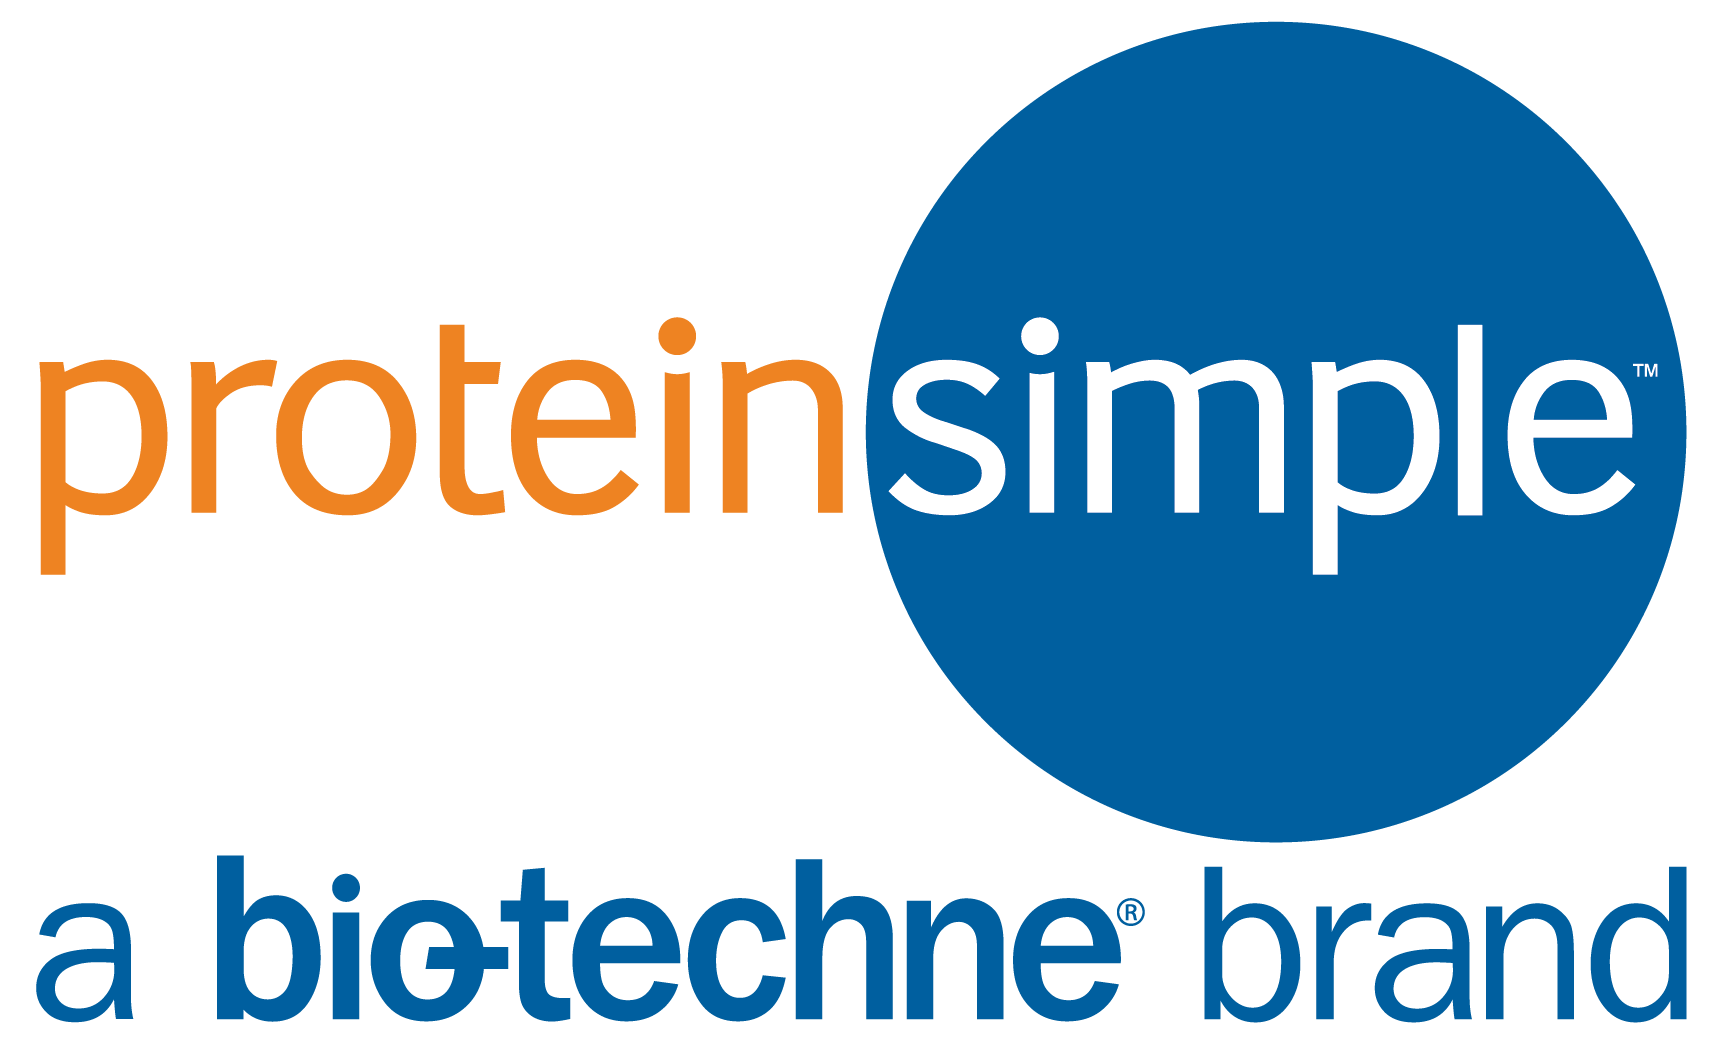 https://www.proteinsimple.com/cell-and-gene-therapy.html  